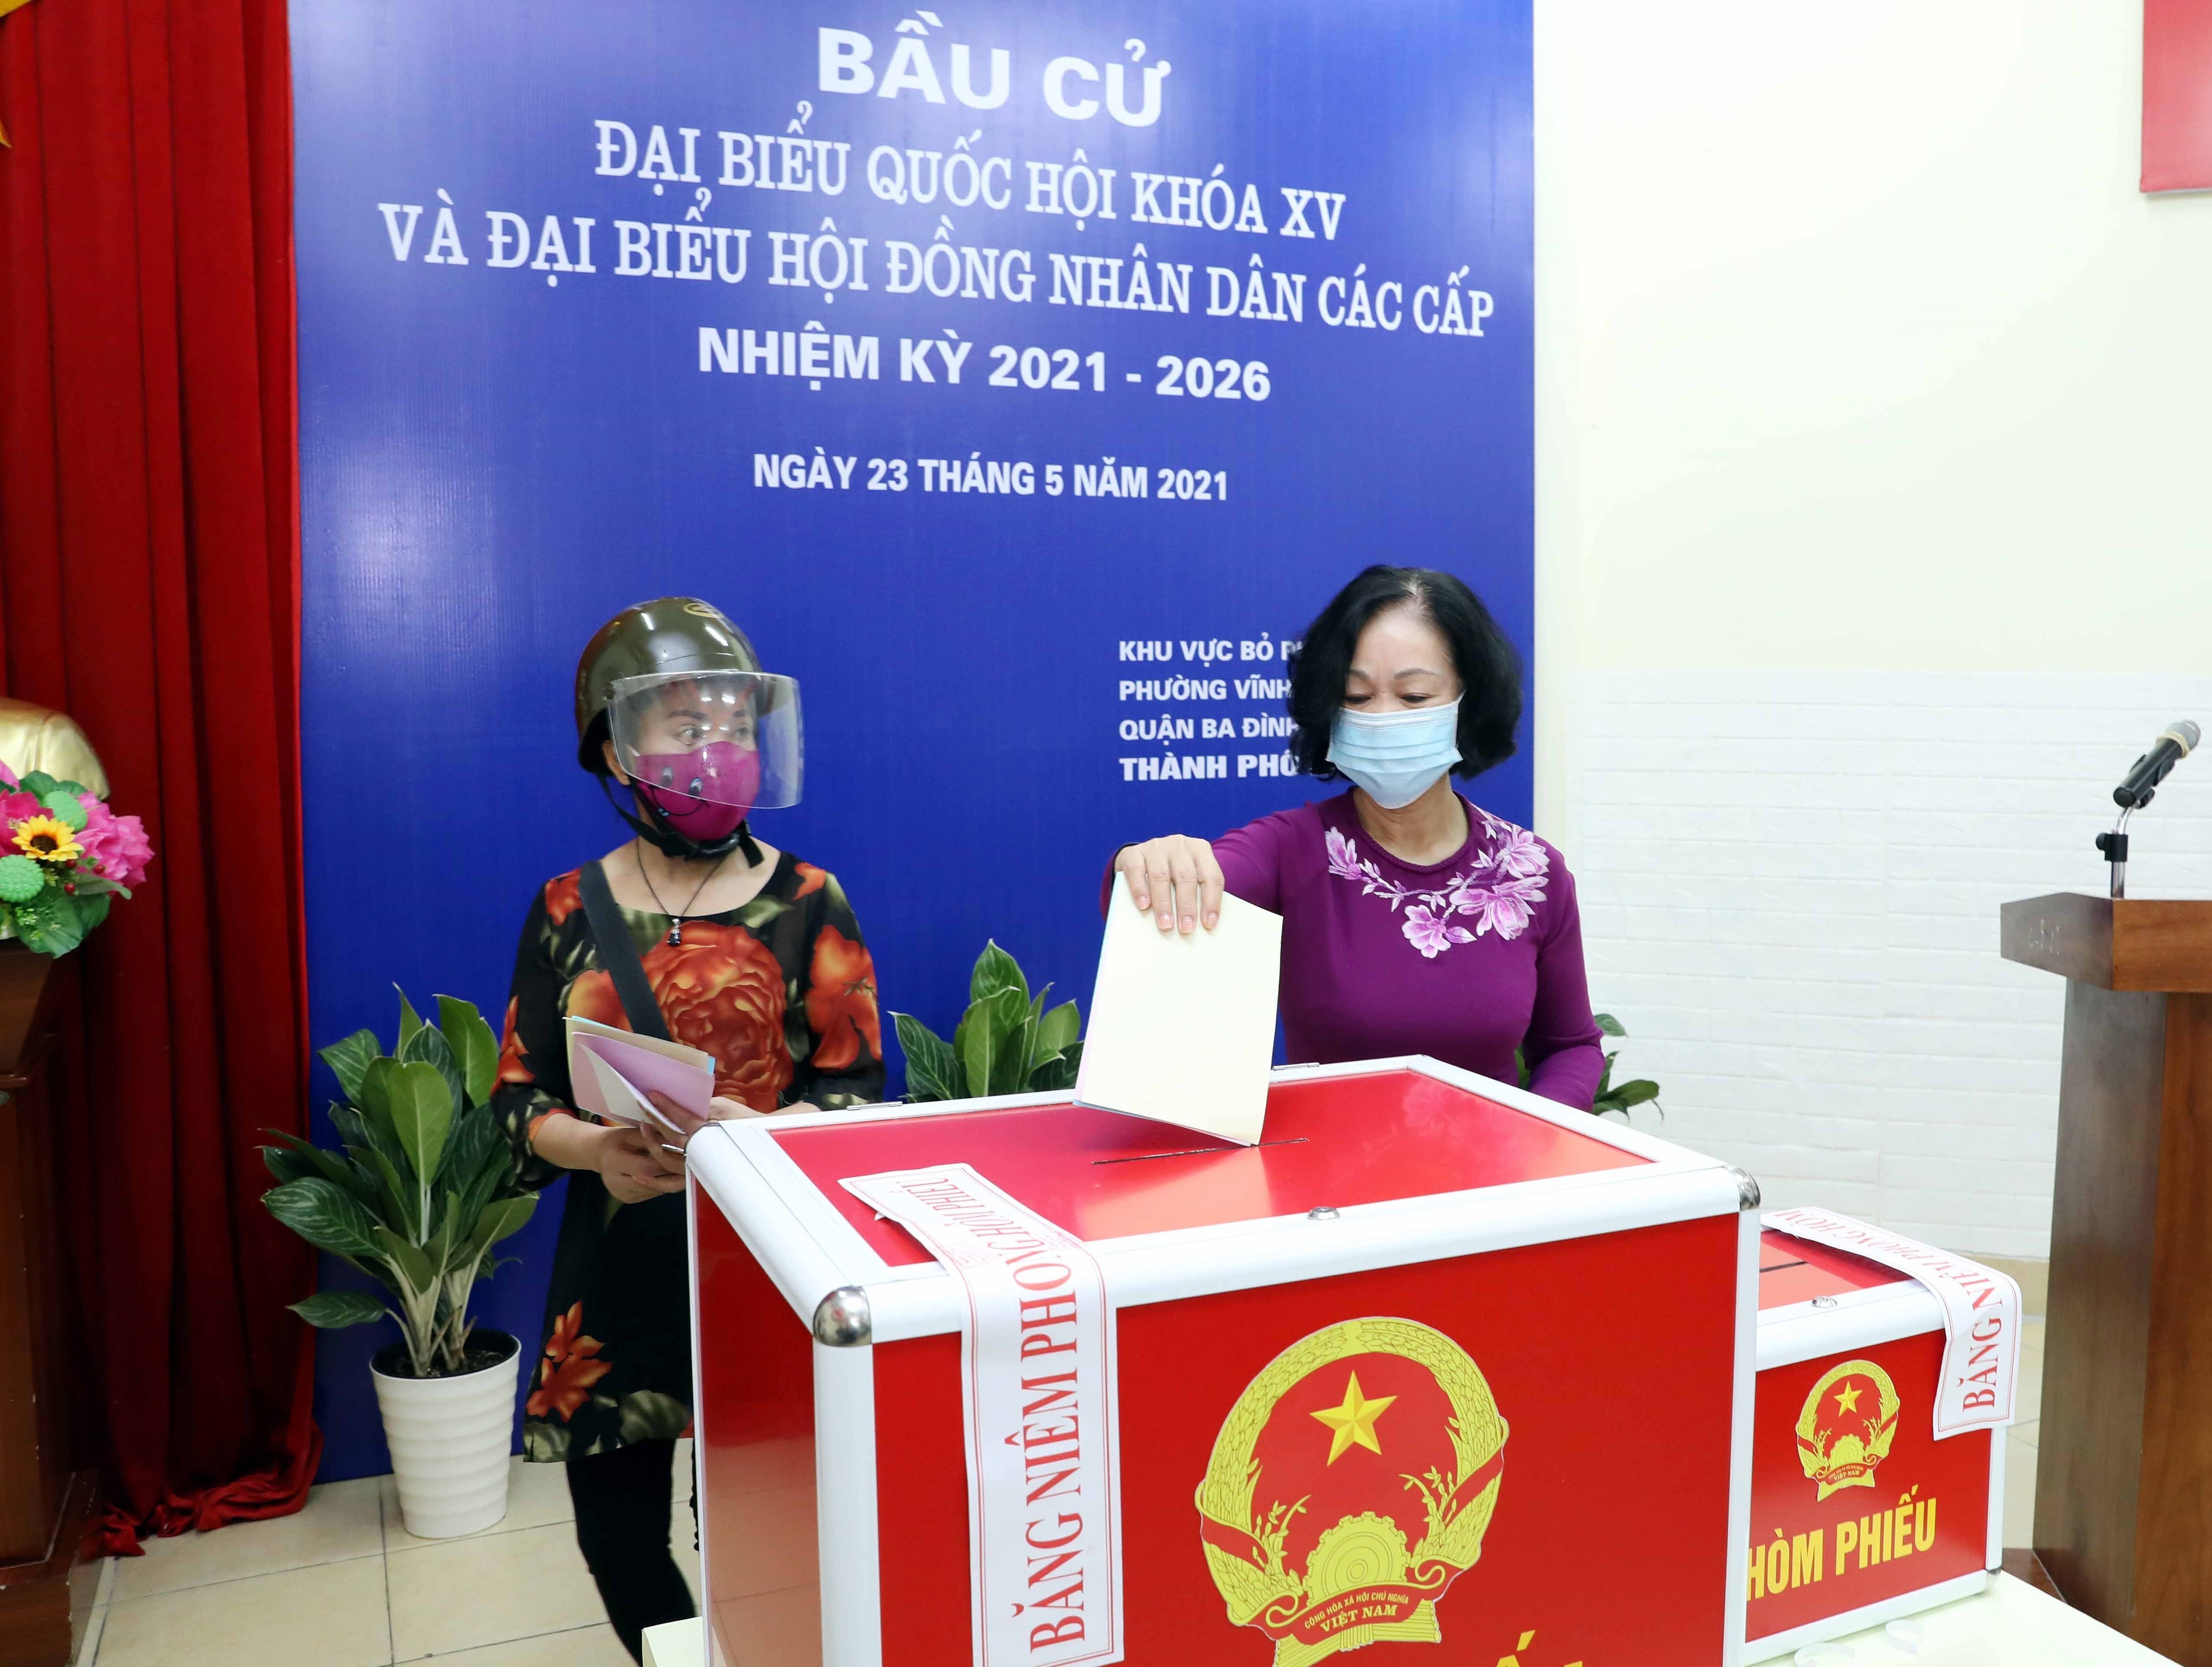 Incumbent, former top officials head to polls in Hanoi hinh anh 1